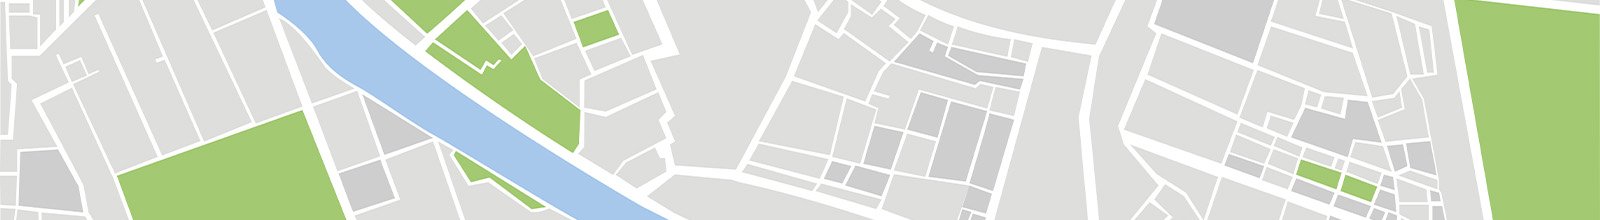 Map of a city